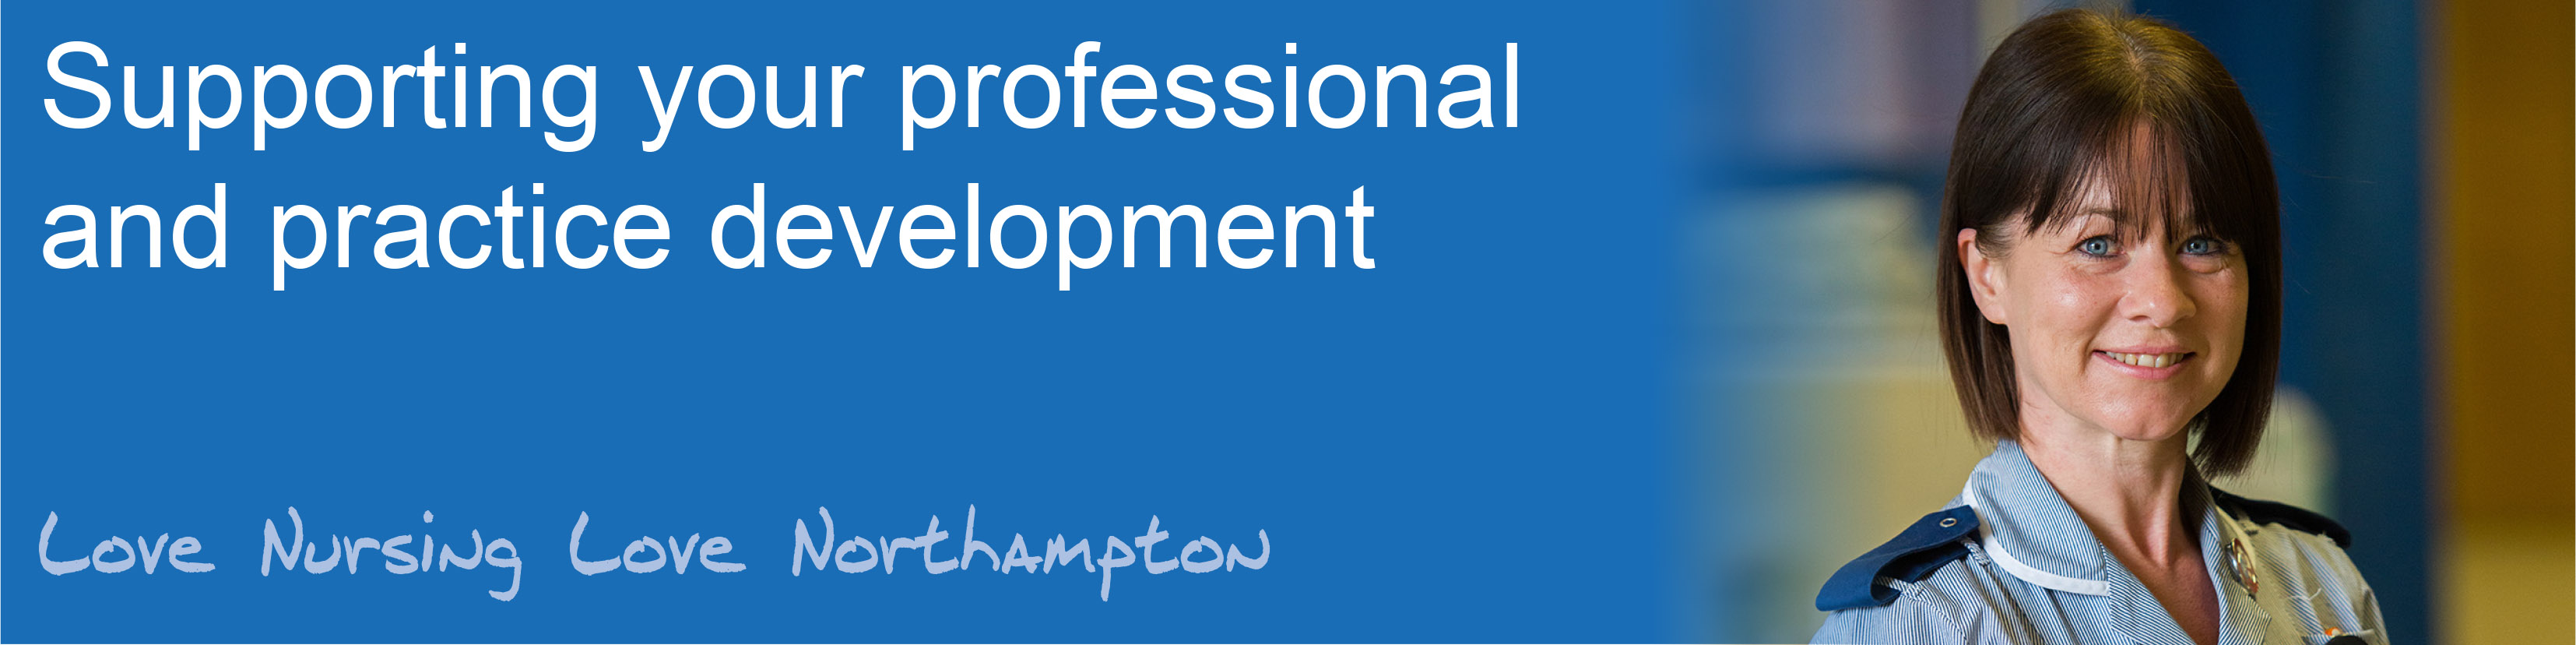 Supporting your professional and practice development. Love nursing, love Northampton